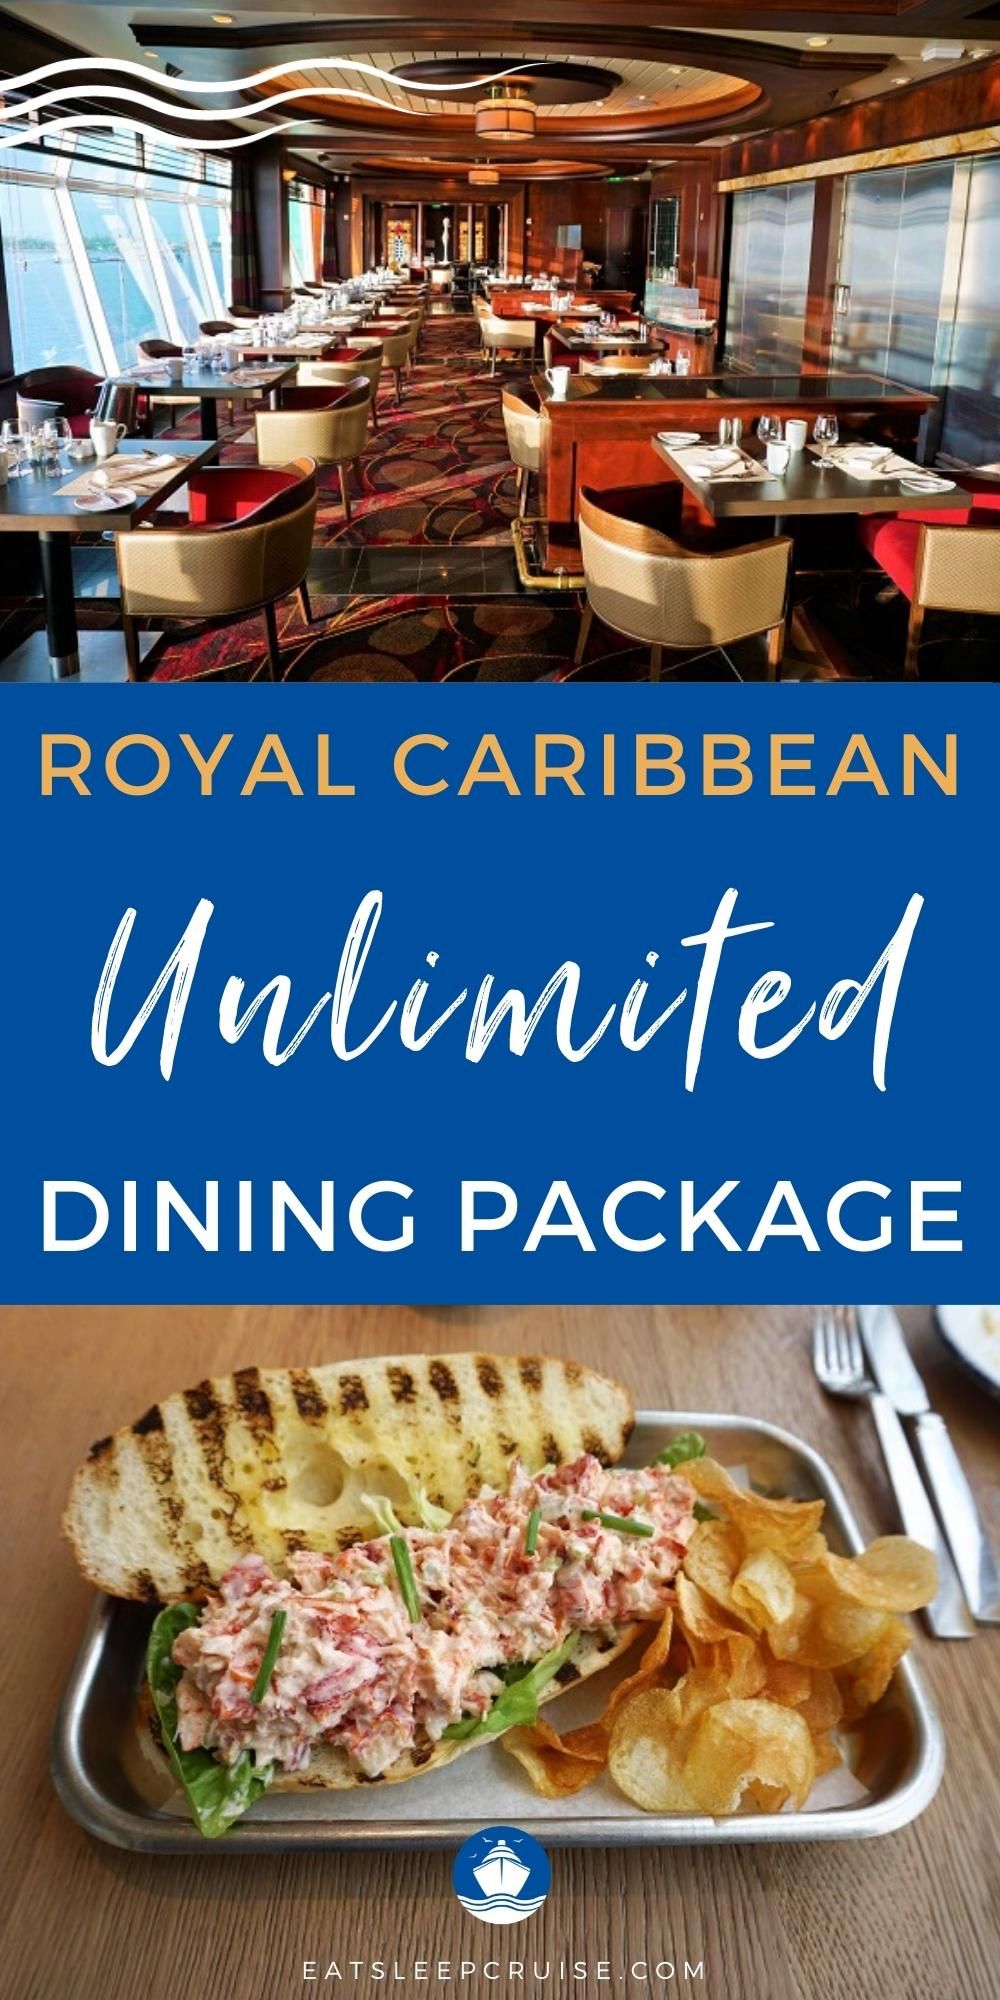 Royal Caribbean's Unlimited Dining Package